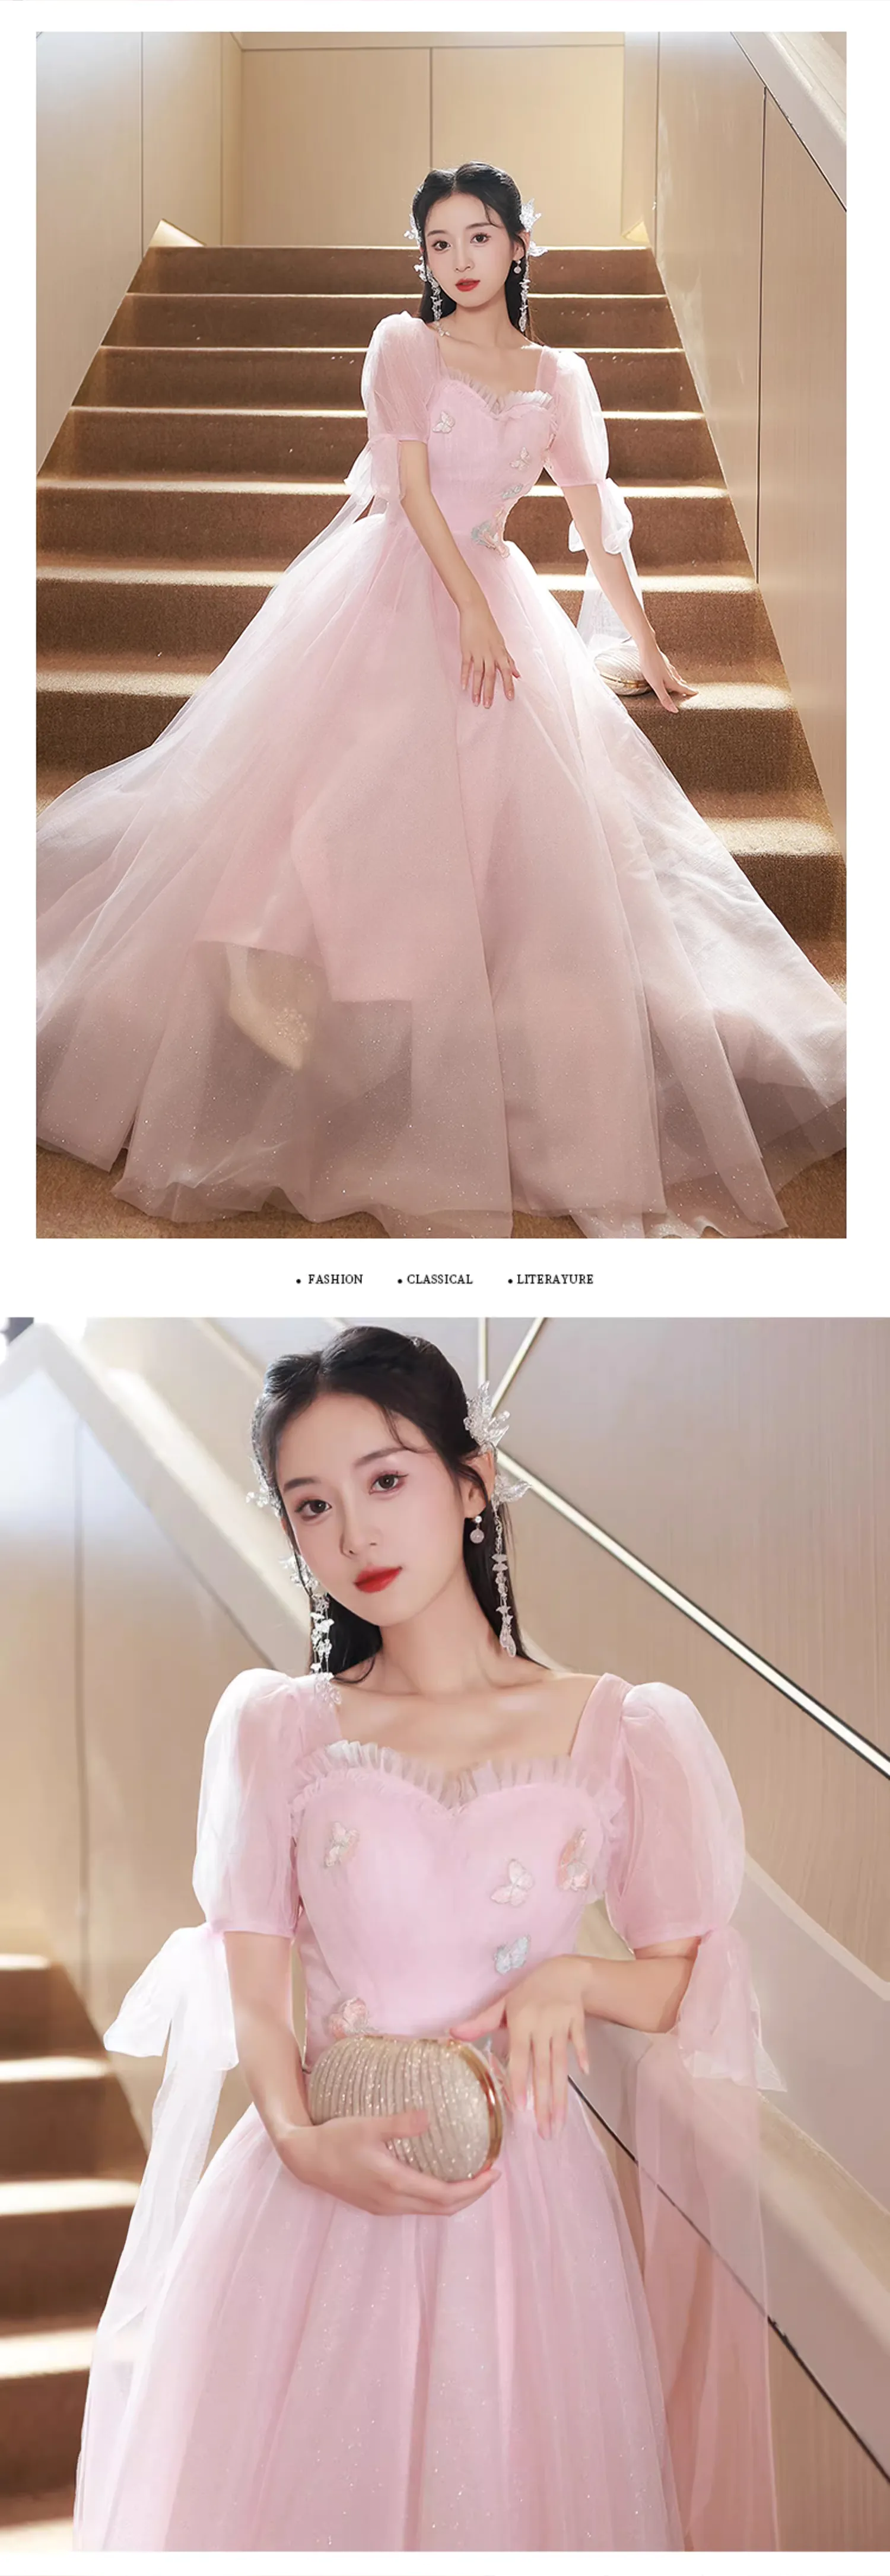 Sweet-Charming-Pink-Tulle-Short-Sleeve-Cocktail-Party-Evening-Dress10